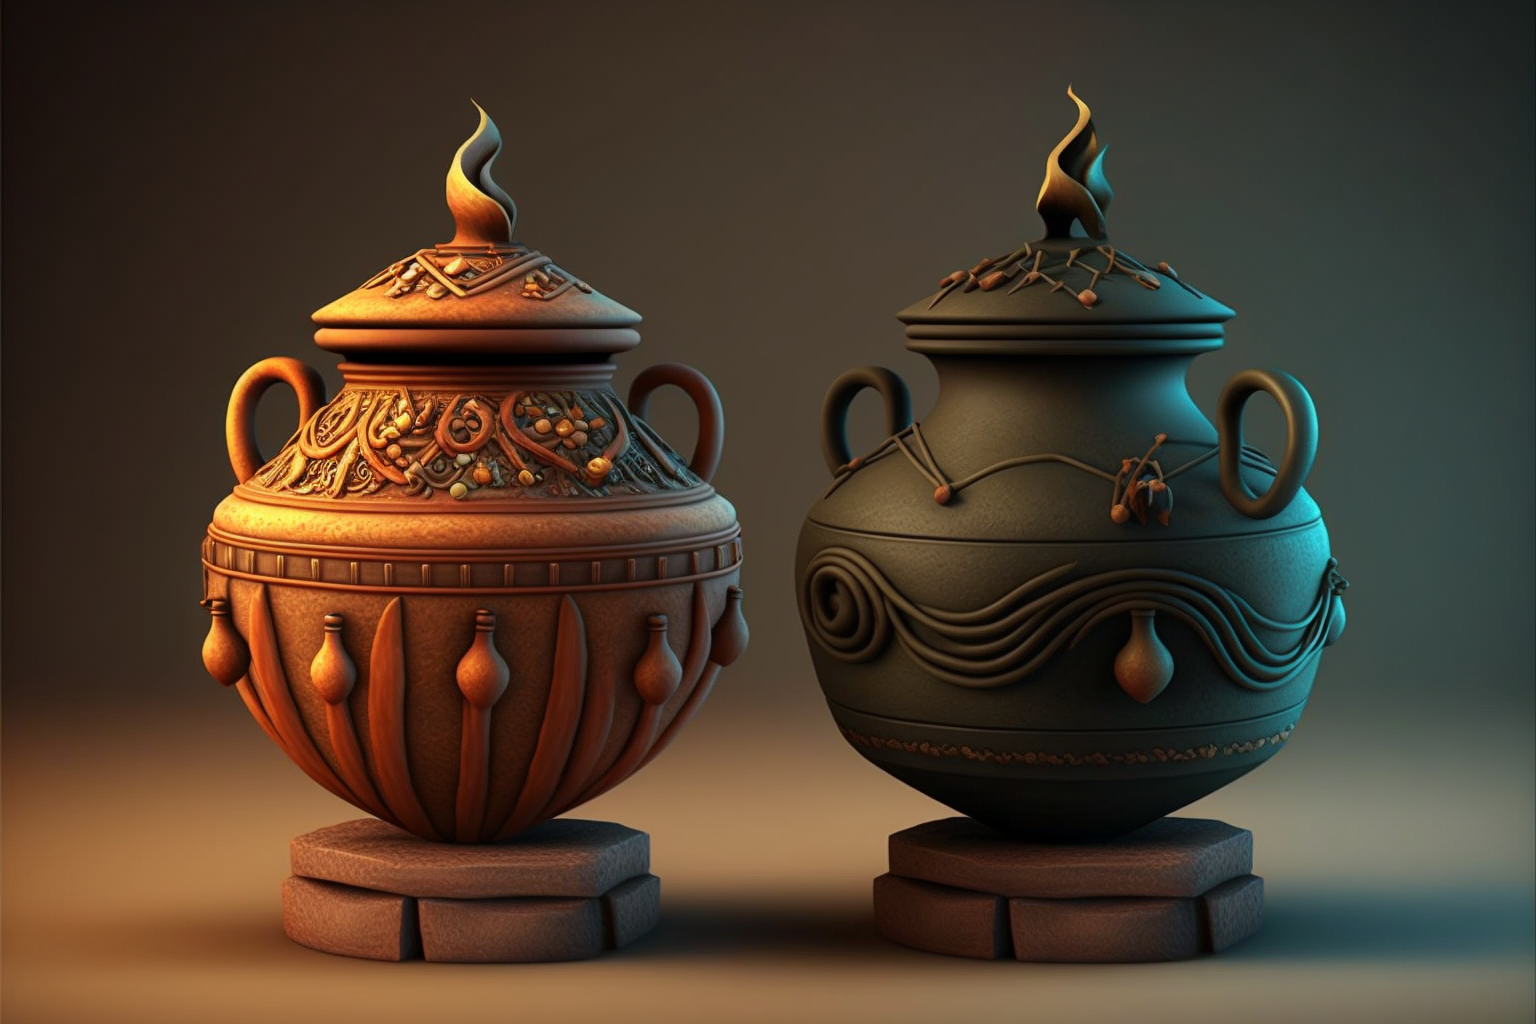 The Two Pots